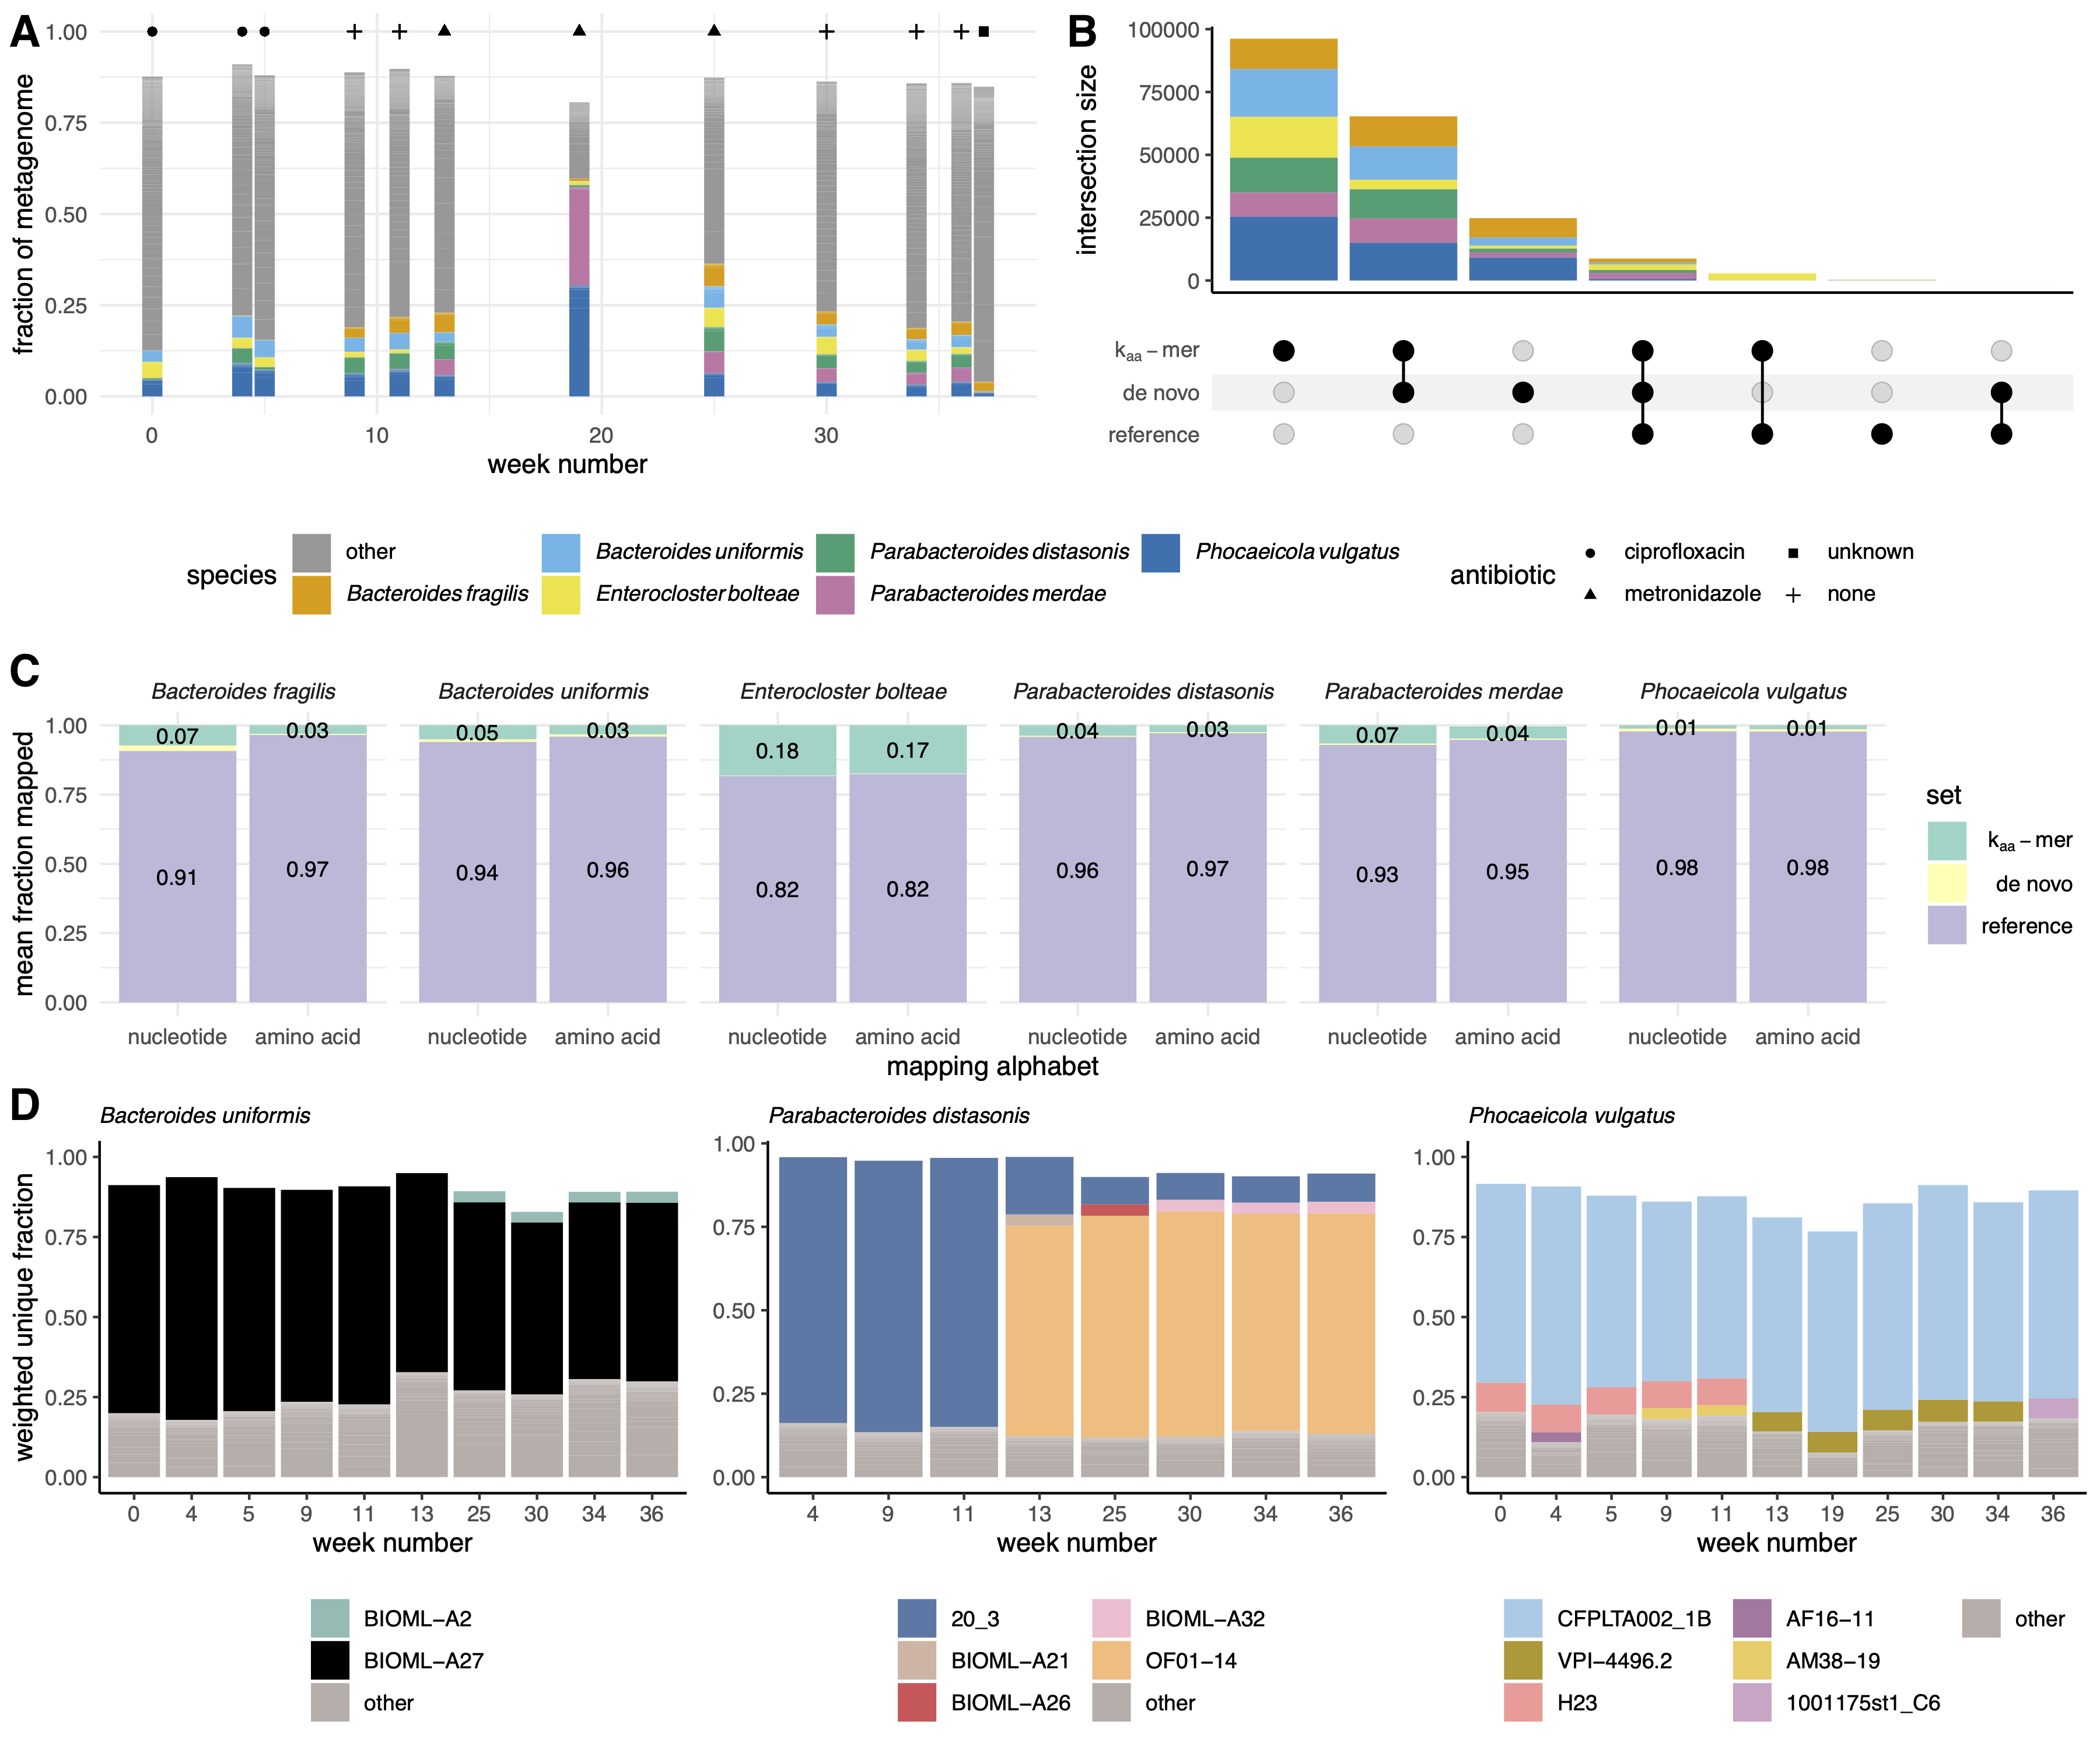 Figure 4: Kaa-mer metapangenomes reveal species and strain dynamics in time series gut microbiome metagenomes after antibiotic exposure. A) Antibiotic courses and corresponding gut microbiome profiles for a single individual with Crohn’s disease. Fractional abundances are colored by species, with only the six species that accounted for greater than 2% of all metagenome reads displayed. B) Upset plot of amino acid k-mers (k = 10) present in the kaa-mer metapangenomes, the de novo metapangenomes, and the reference pangenome. Intersections are colored by species. C) Bar plots indicating the average fraction of reads used to build the kaa-mer metapangenome that mapped first against the reference pangenome, then against the de novo metapangenome, or were unmapped. More reads mapped in amino acid space than in nucleotide space. Only the fraction of reads that mapped to the reference pangenome and the fraction reads that were unmapped are labelled. D) Bar plots of the fraction of kaa-mer metapangenome sequences that were anchored to a given strain using the sourmash gather algorithm against the GTDB rs202 database (k = 51). Colors represent strains, which are labelled by their NCBI strain name. Missing fractions depicted as blank space between the bar and one represent novel k-mers not in the database. Only genomes that accounted for greater than 2% of the weighted fractional abundance and that were annotated as the same species are colored. Weeks in which the species was low-abundance are excluded. Starting at at week 13, sequences from previously unobserved strains were detected within each metapangenome. This timing coincides with metronidazole administration.